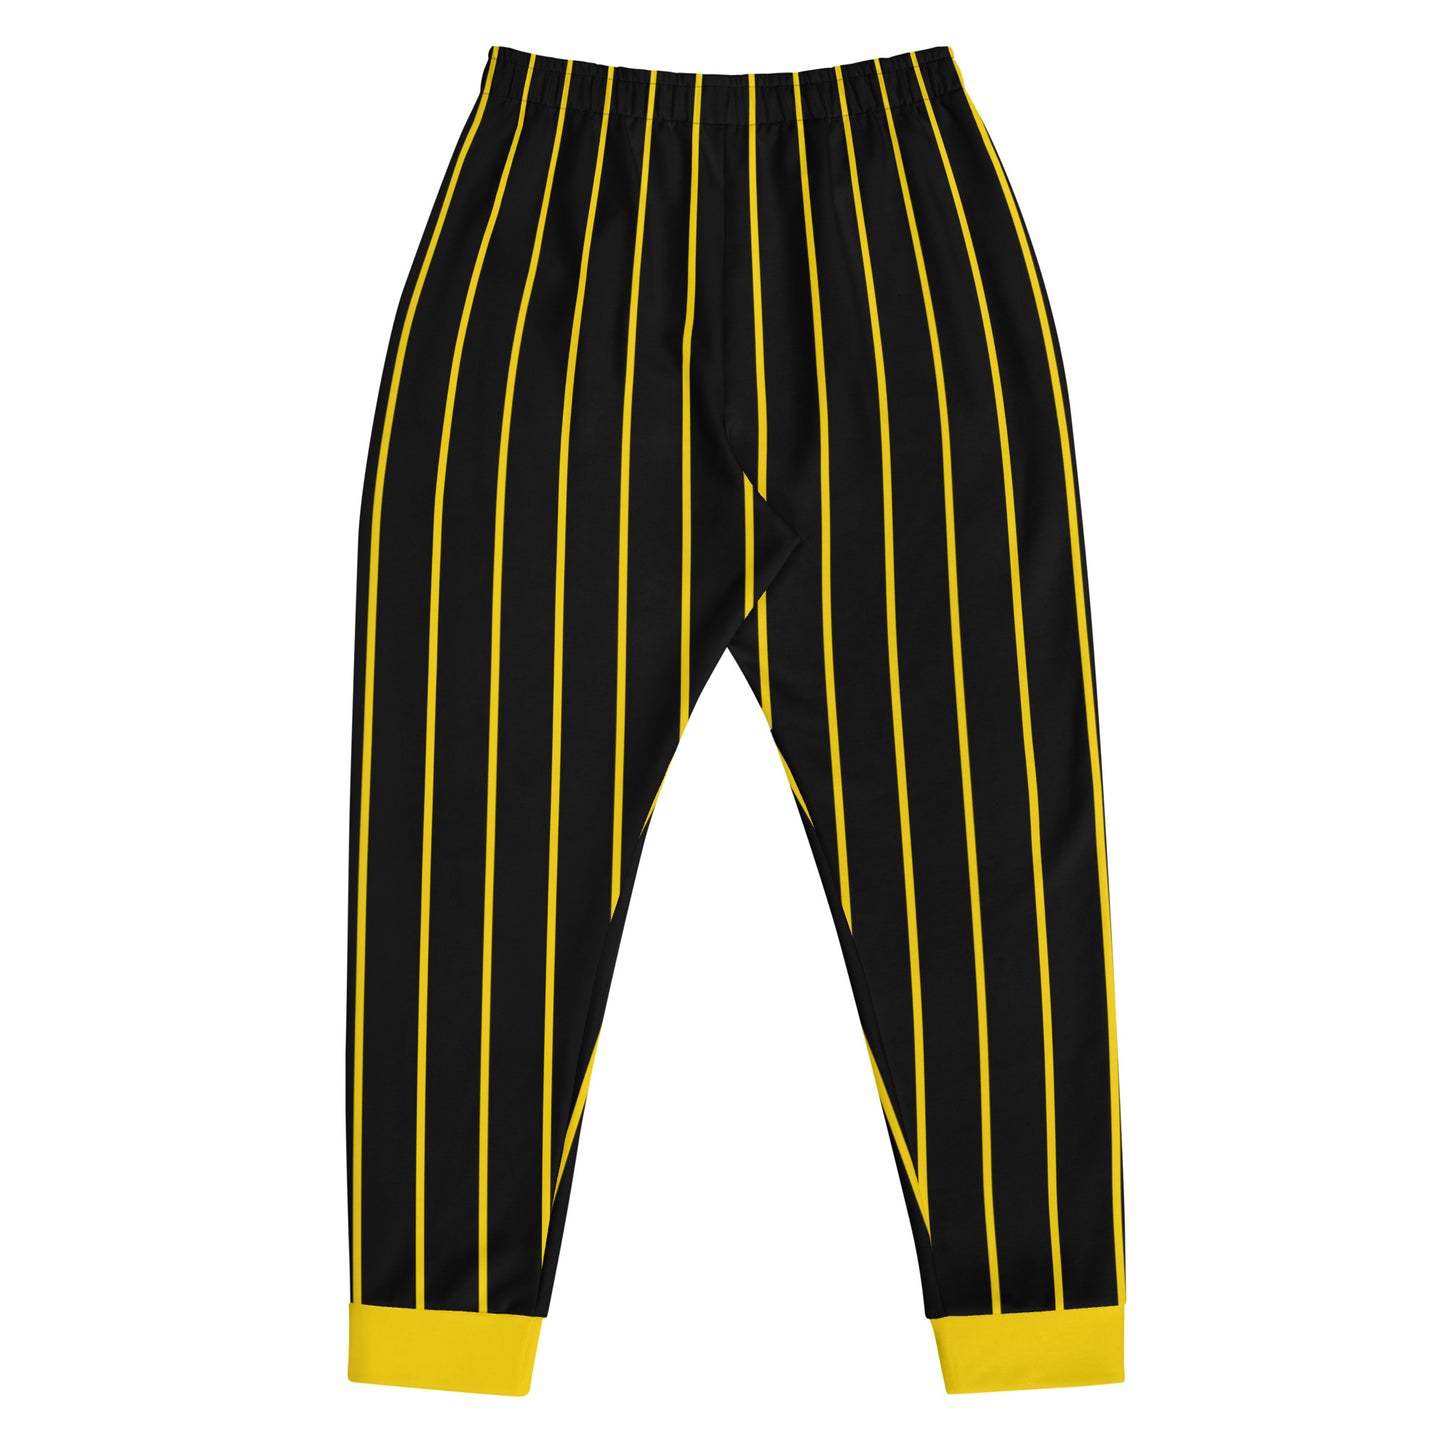 The College Experience - Pinstripes Men's Joggers